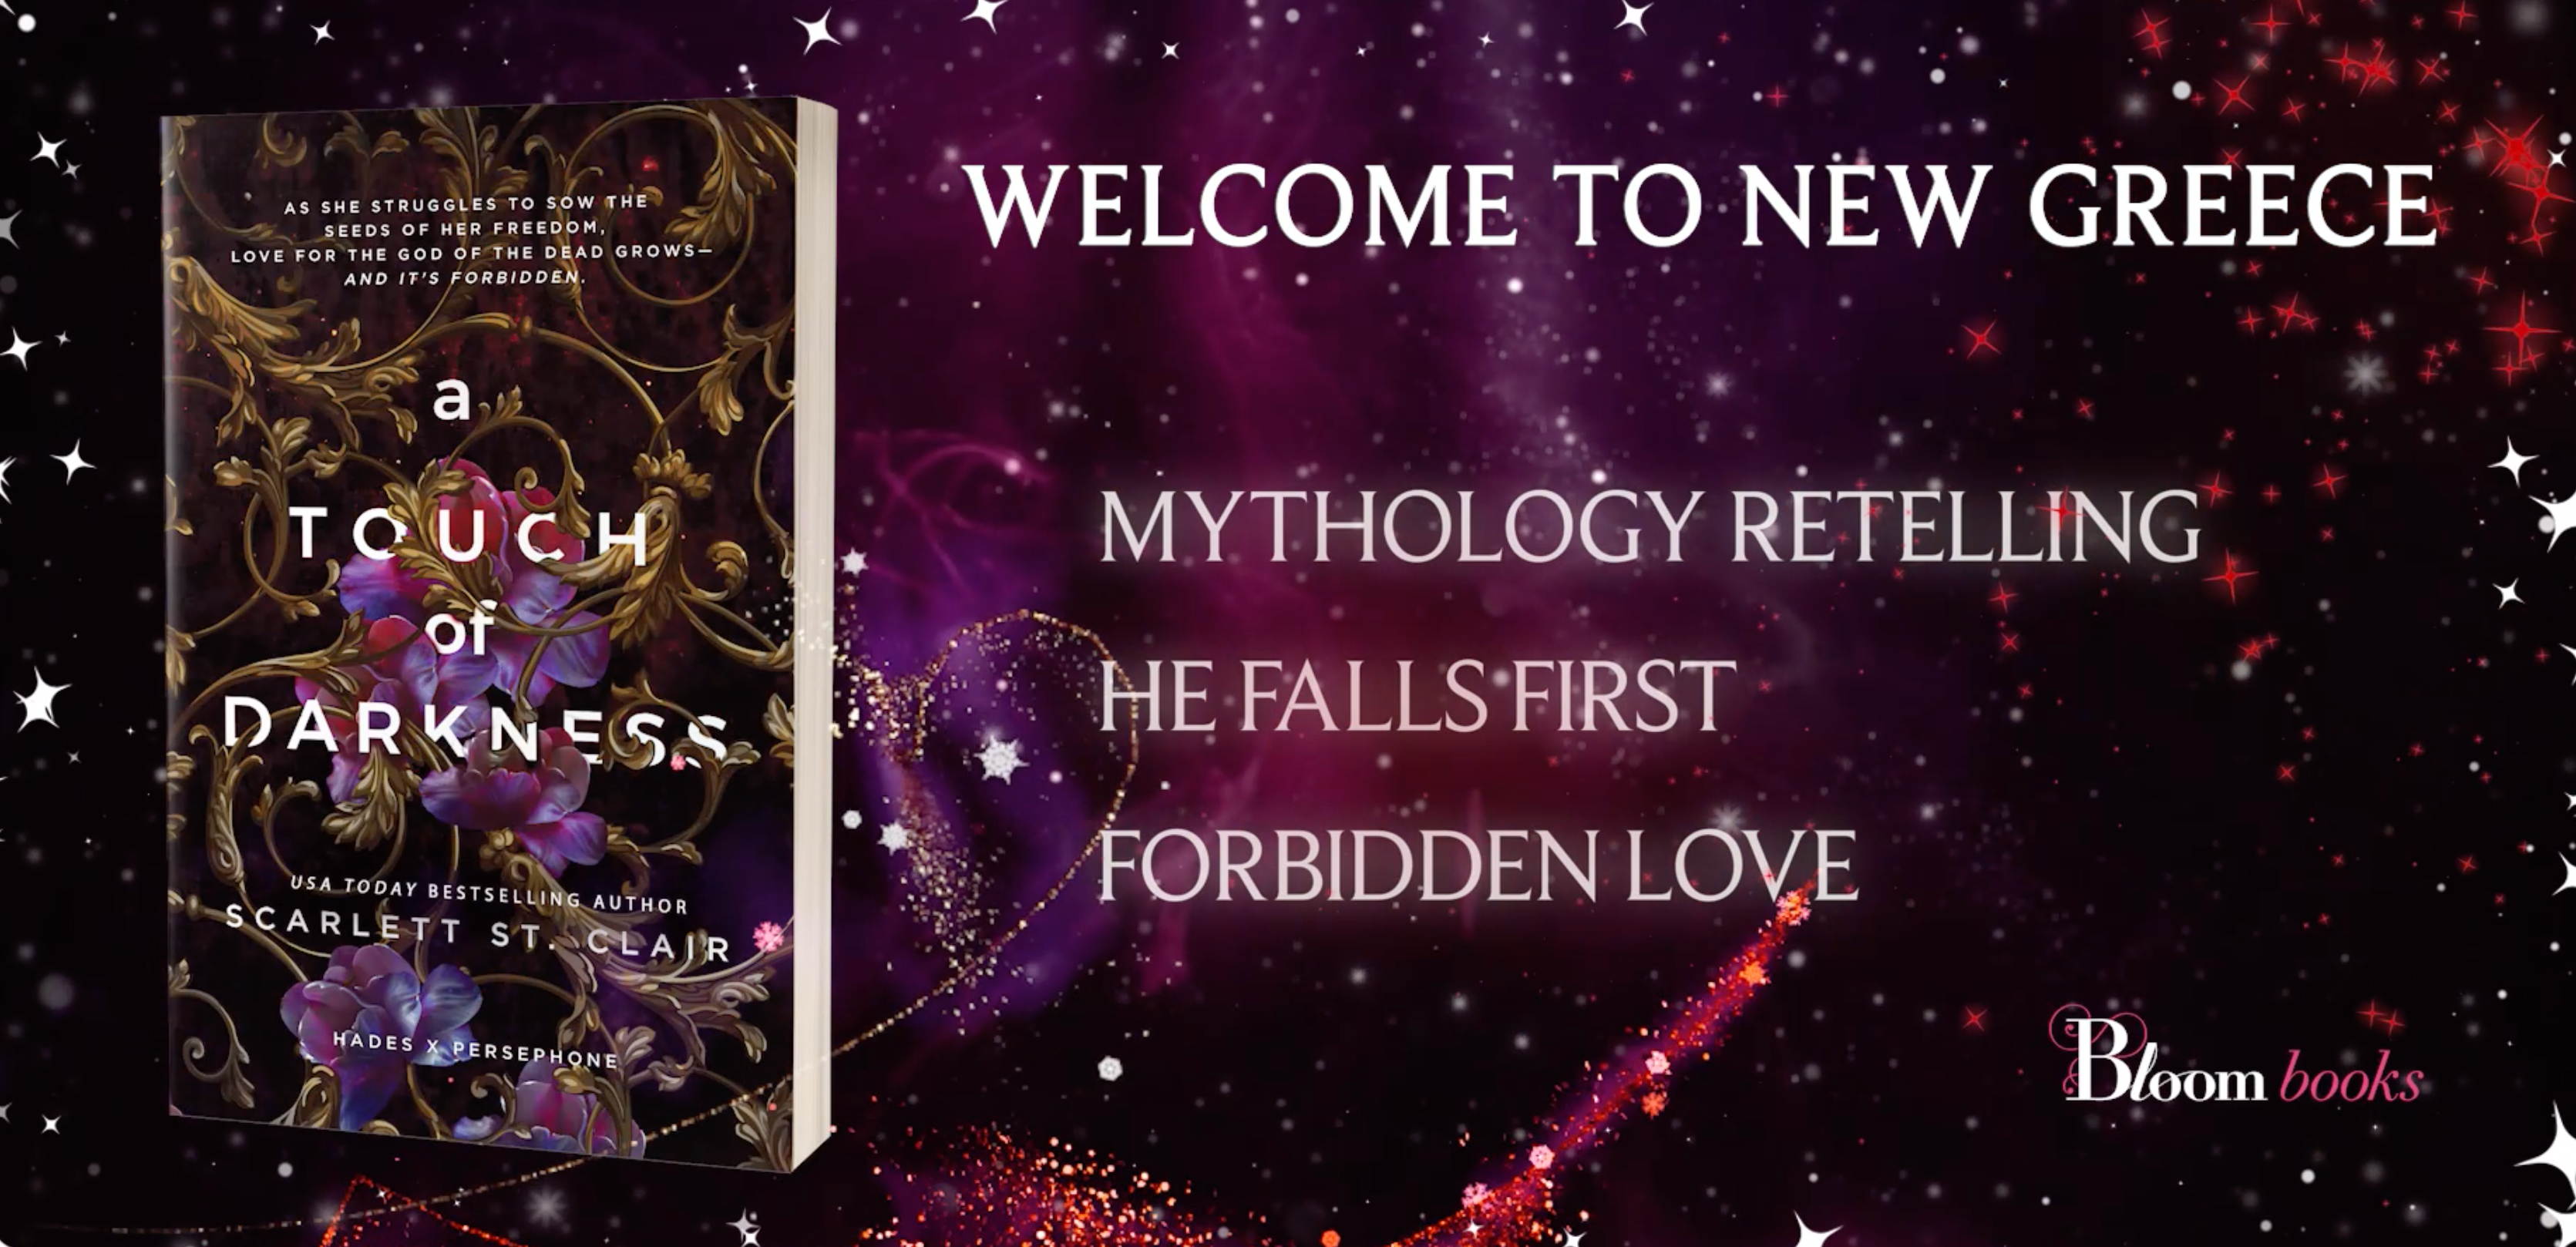 Welcome to New Greece. Mythology retelling. He falls first. Forbidden love.